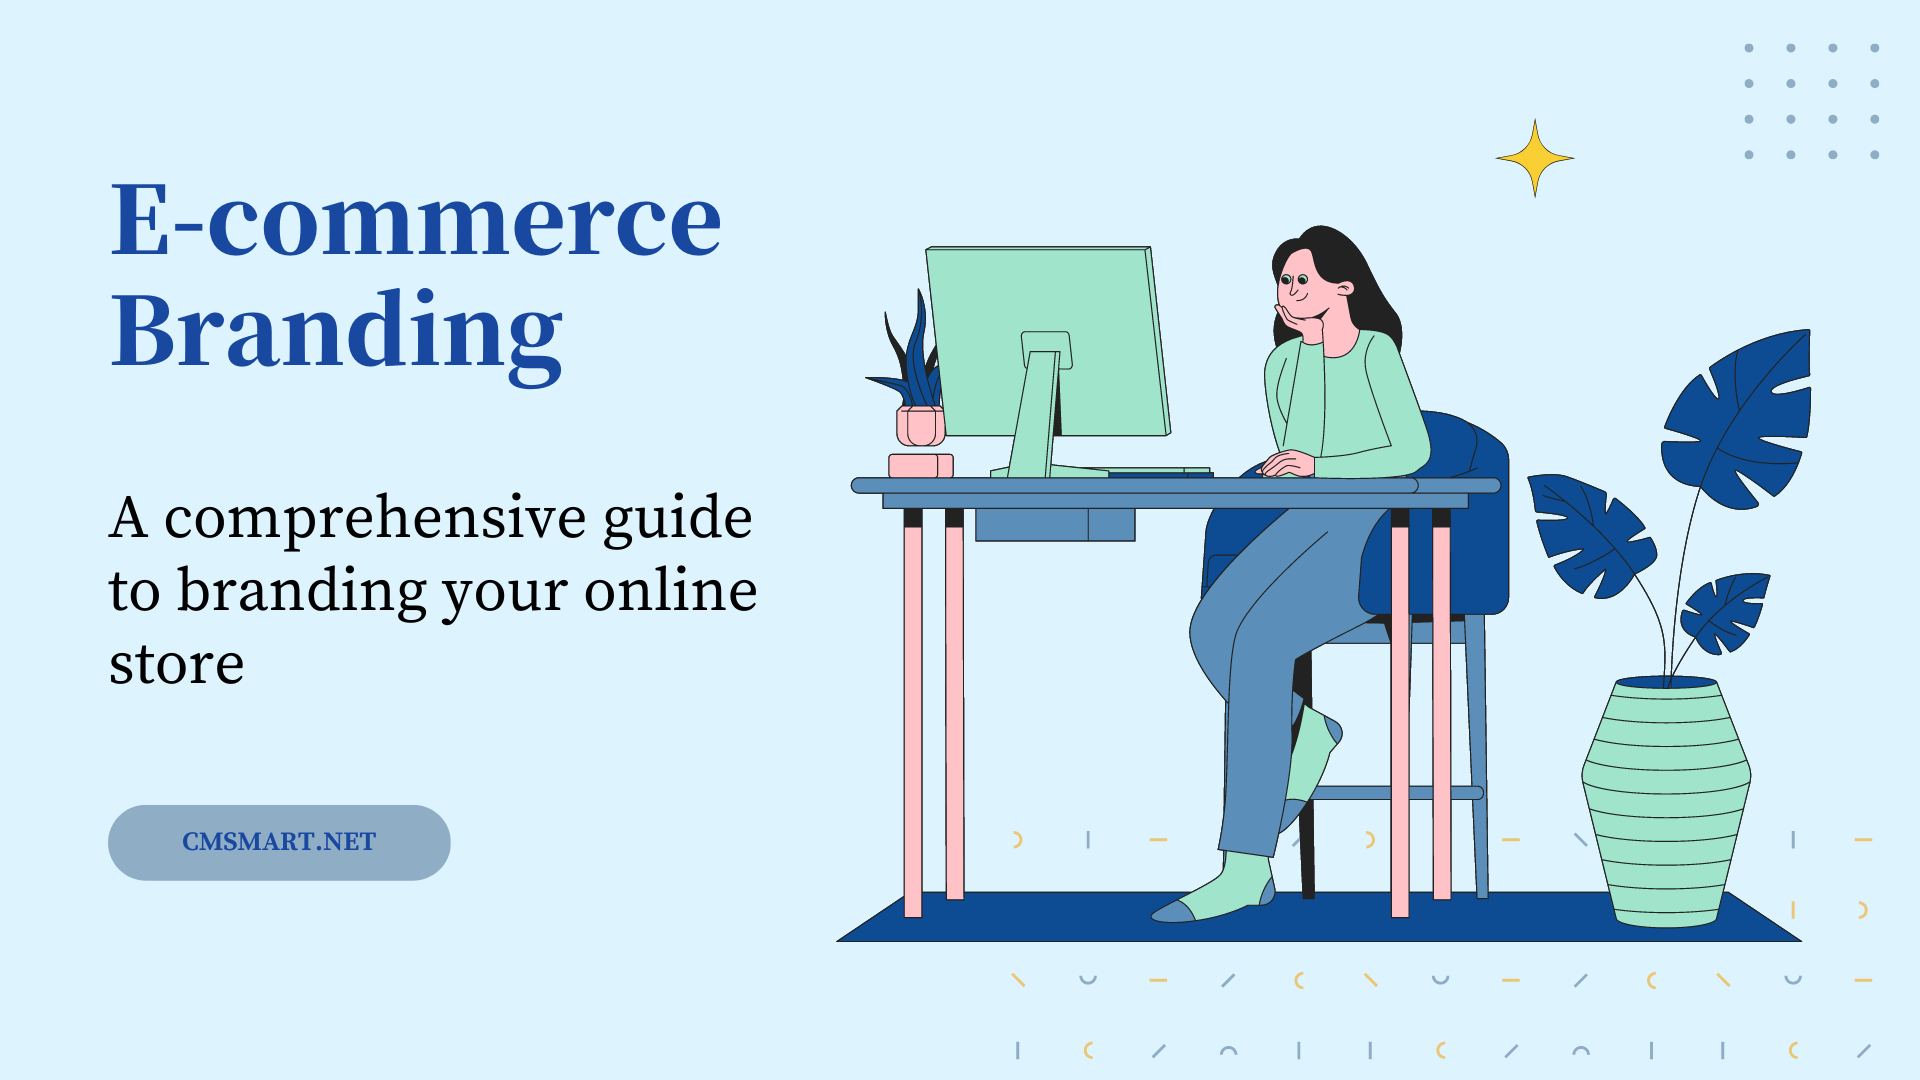 E-commerce branding: a comprehensive guide to branding your online store